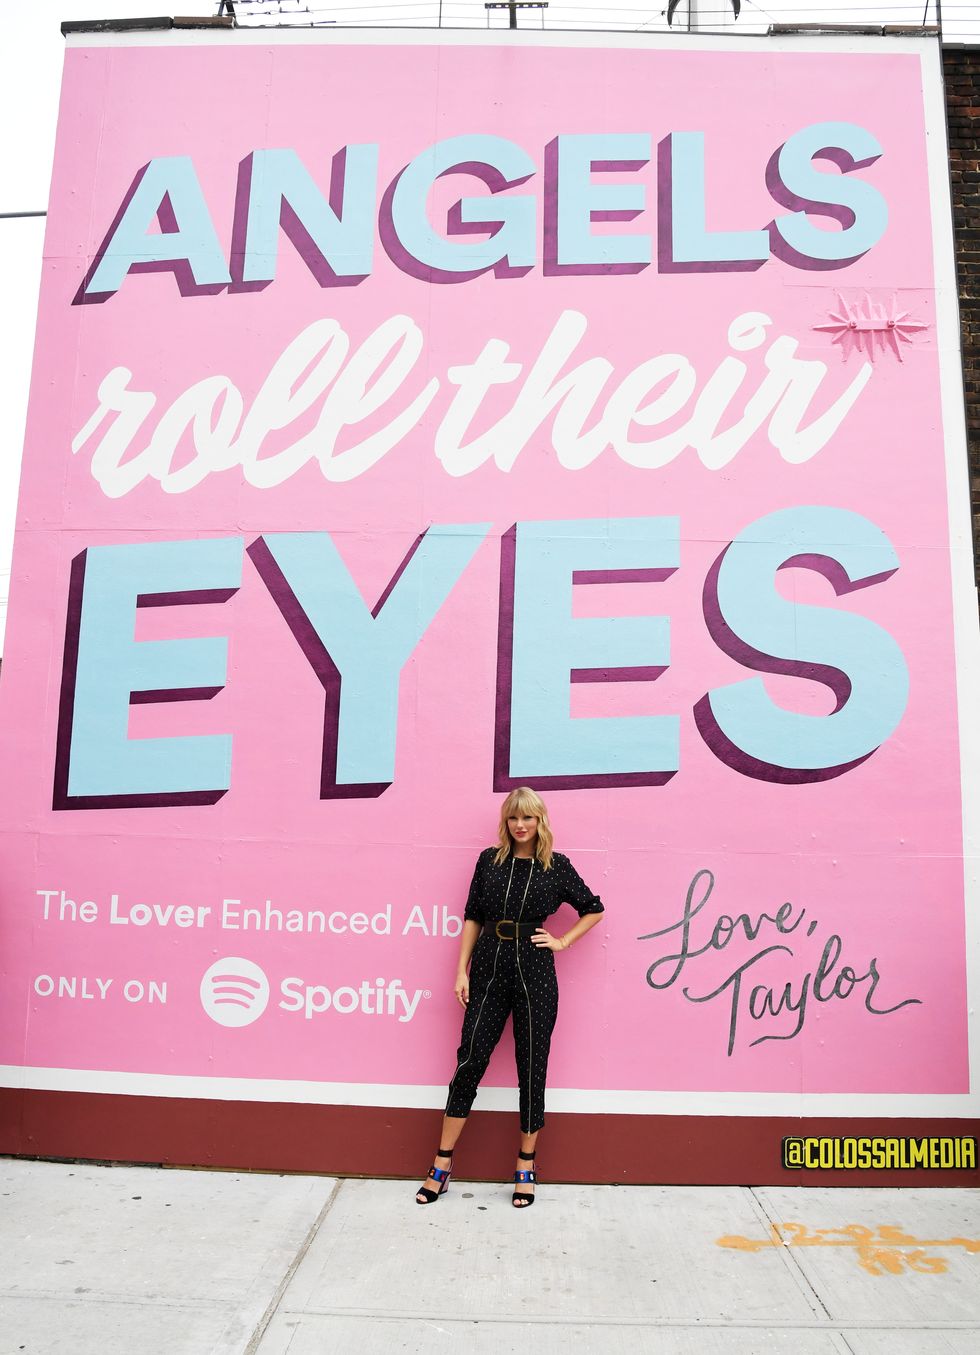 spotify celebrates taylor swift on album release day with mural